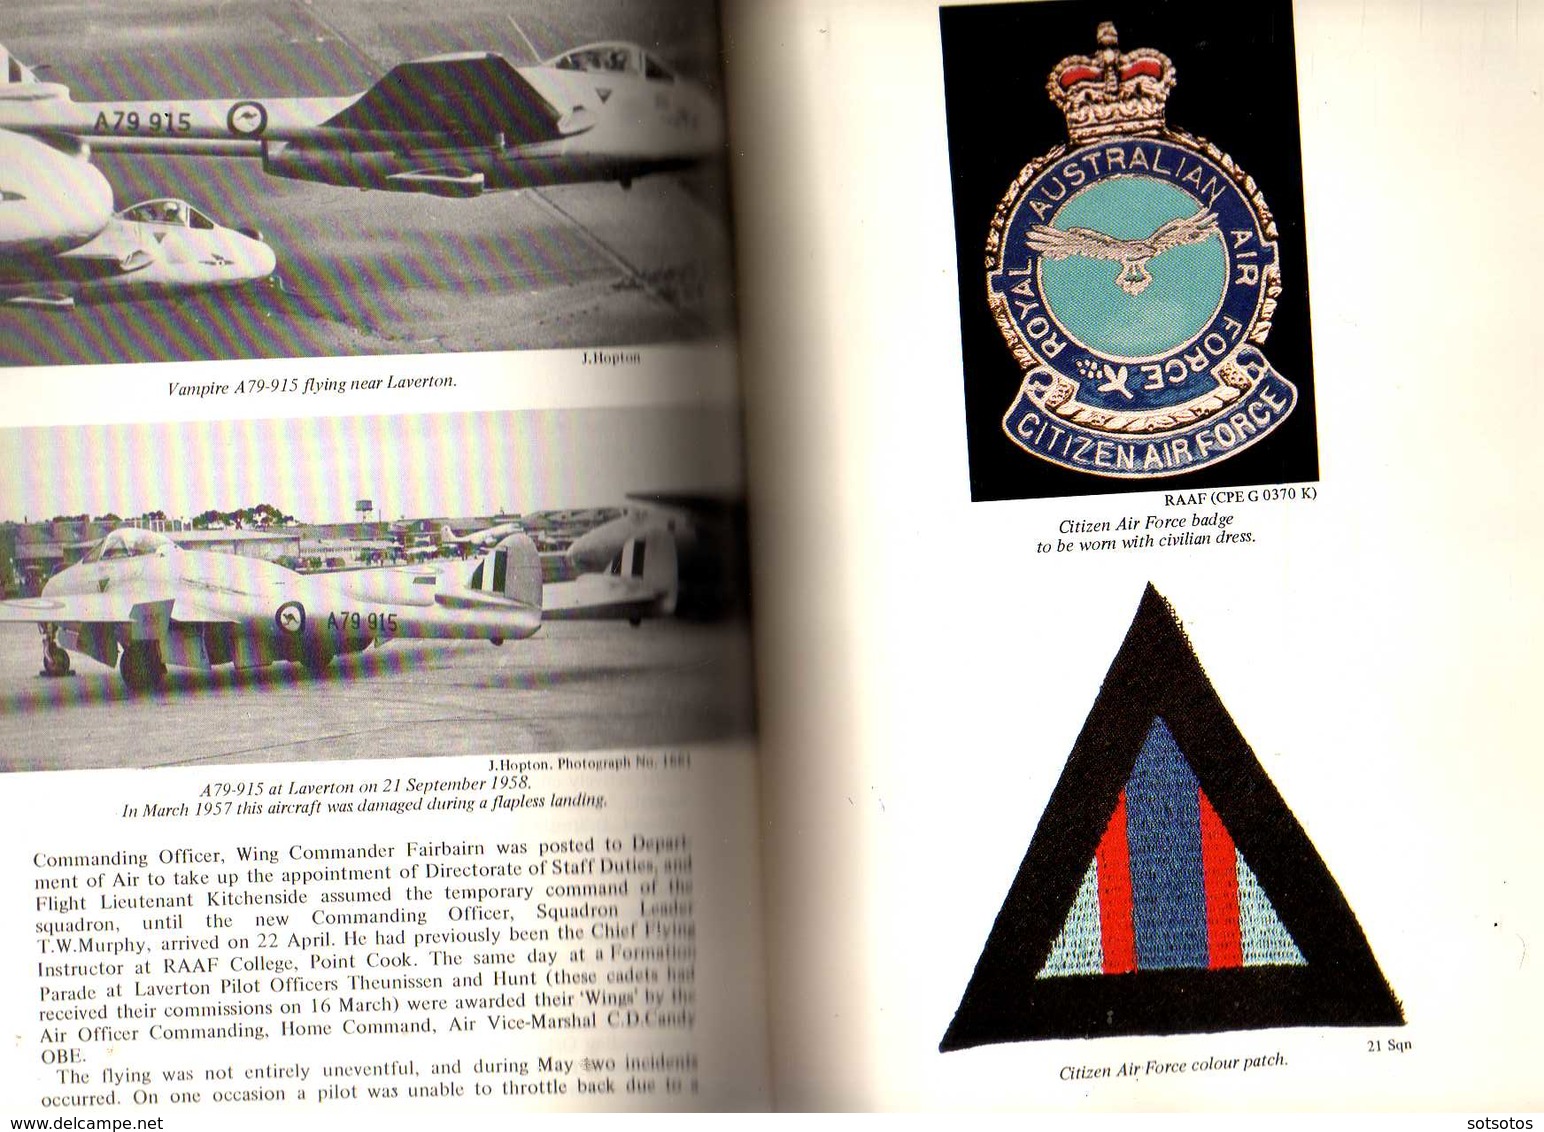 DEMON to VAMPIRE: the STORY of No 21 (City of Melbourne) SQUADRON, Squadron Leader W.H.Brook RAAFAR - 344 pgs – many pho